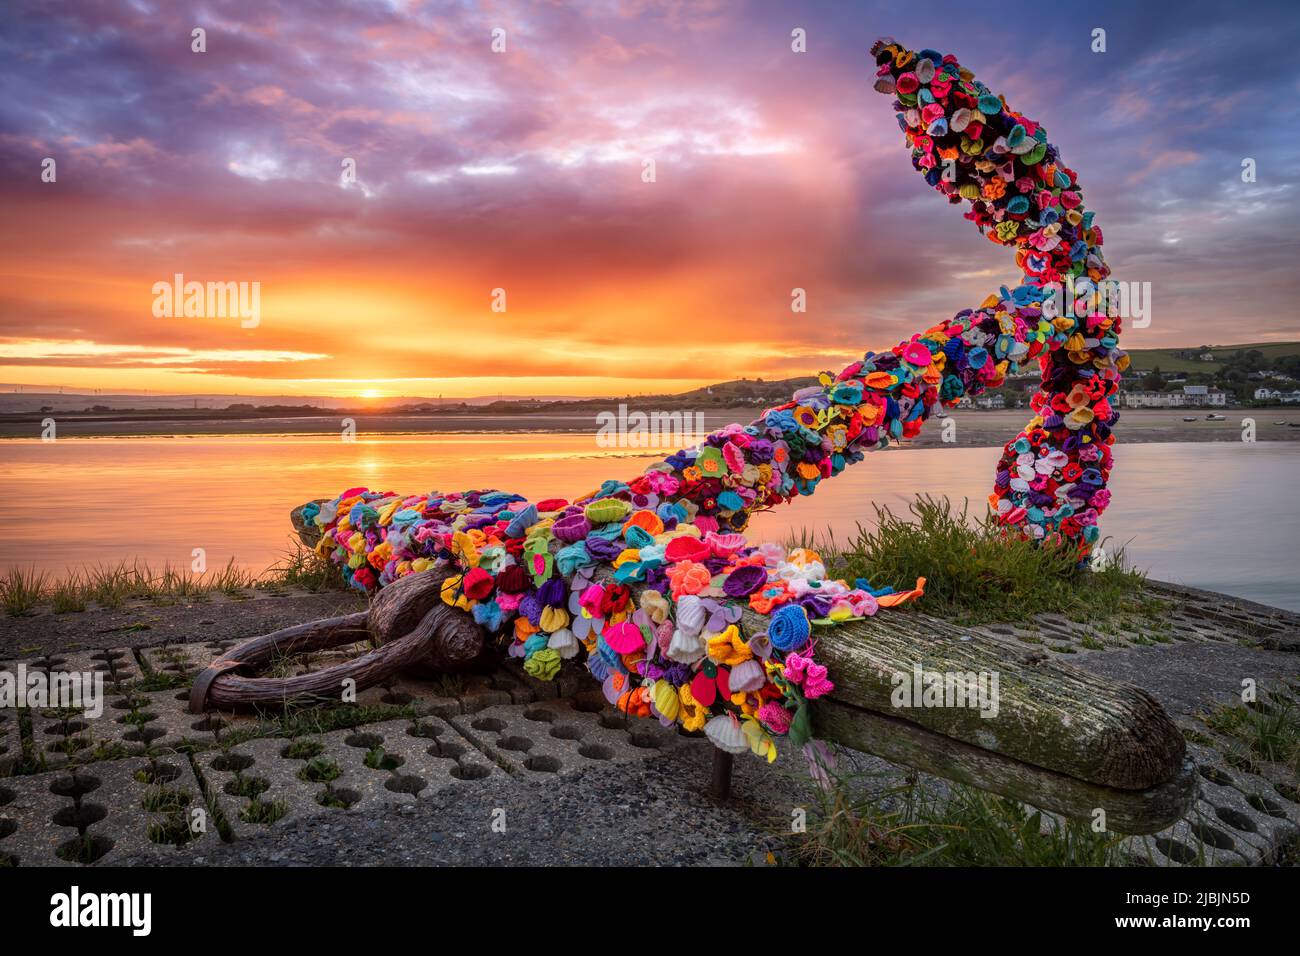 Appledore, North Devon, England. Tuesday 7th June 2022. The sun rises behind the landmark anchor on the quay in Appledore. The anchor has been decorated with hundreds of colourful crocheted flowers by the residents of the North Devon coastal village. Credit: Terry Mathews/Alamy Live News Stock Photo